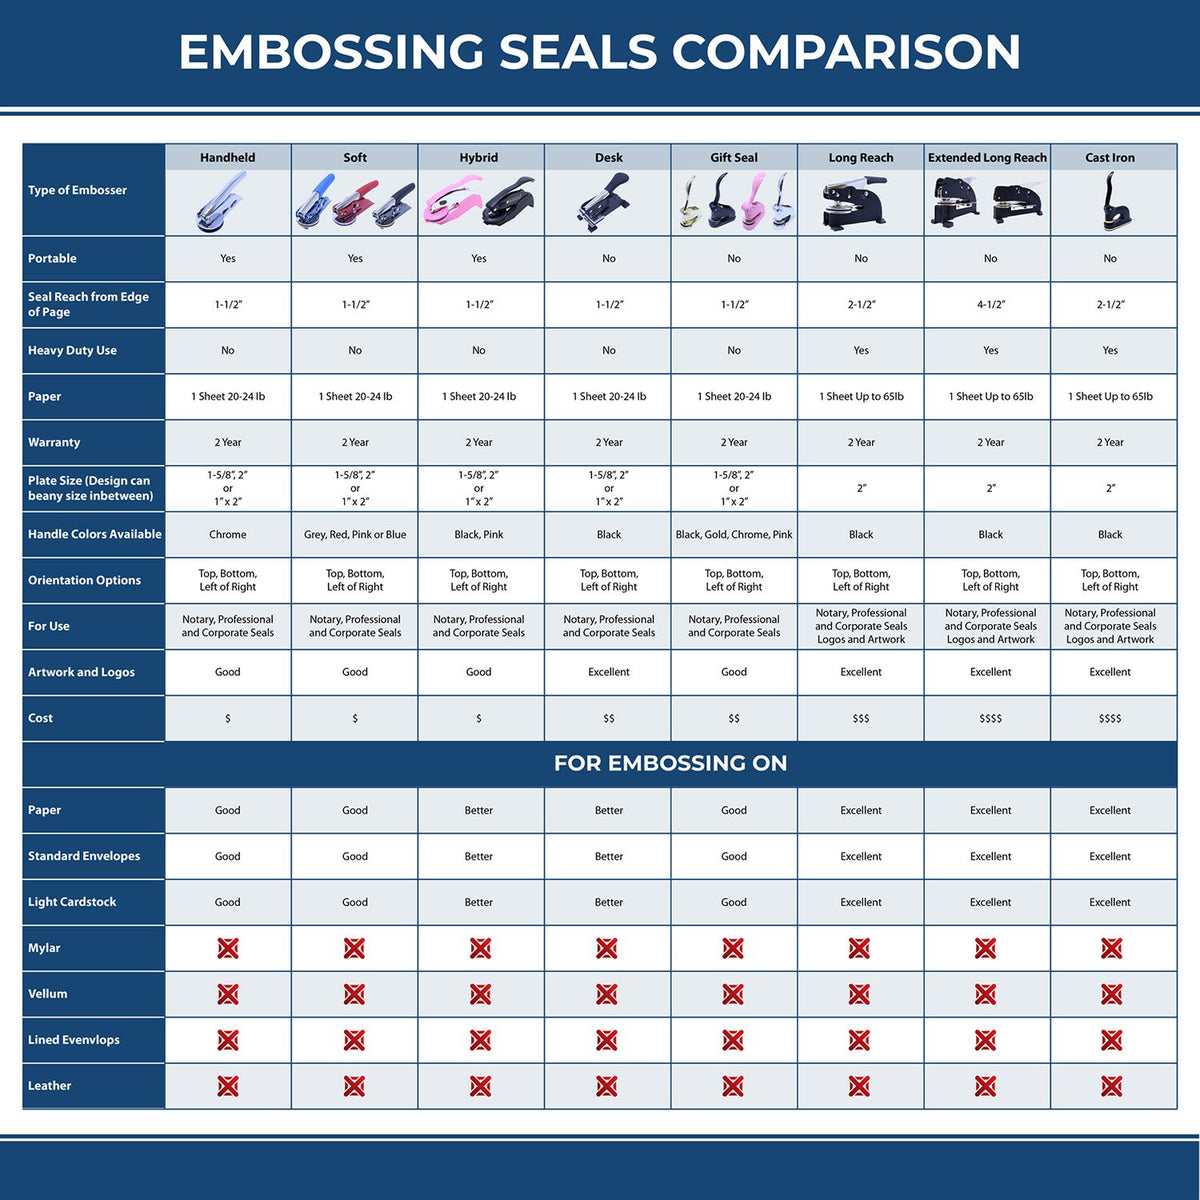 A comparison chart for the different types of mount models available for the Hybrid Indiana Architect Seal